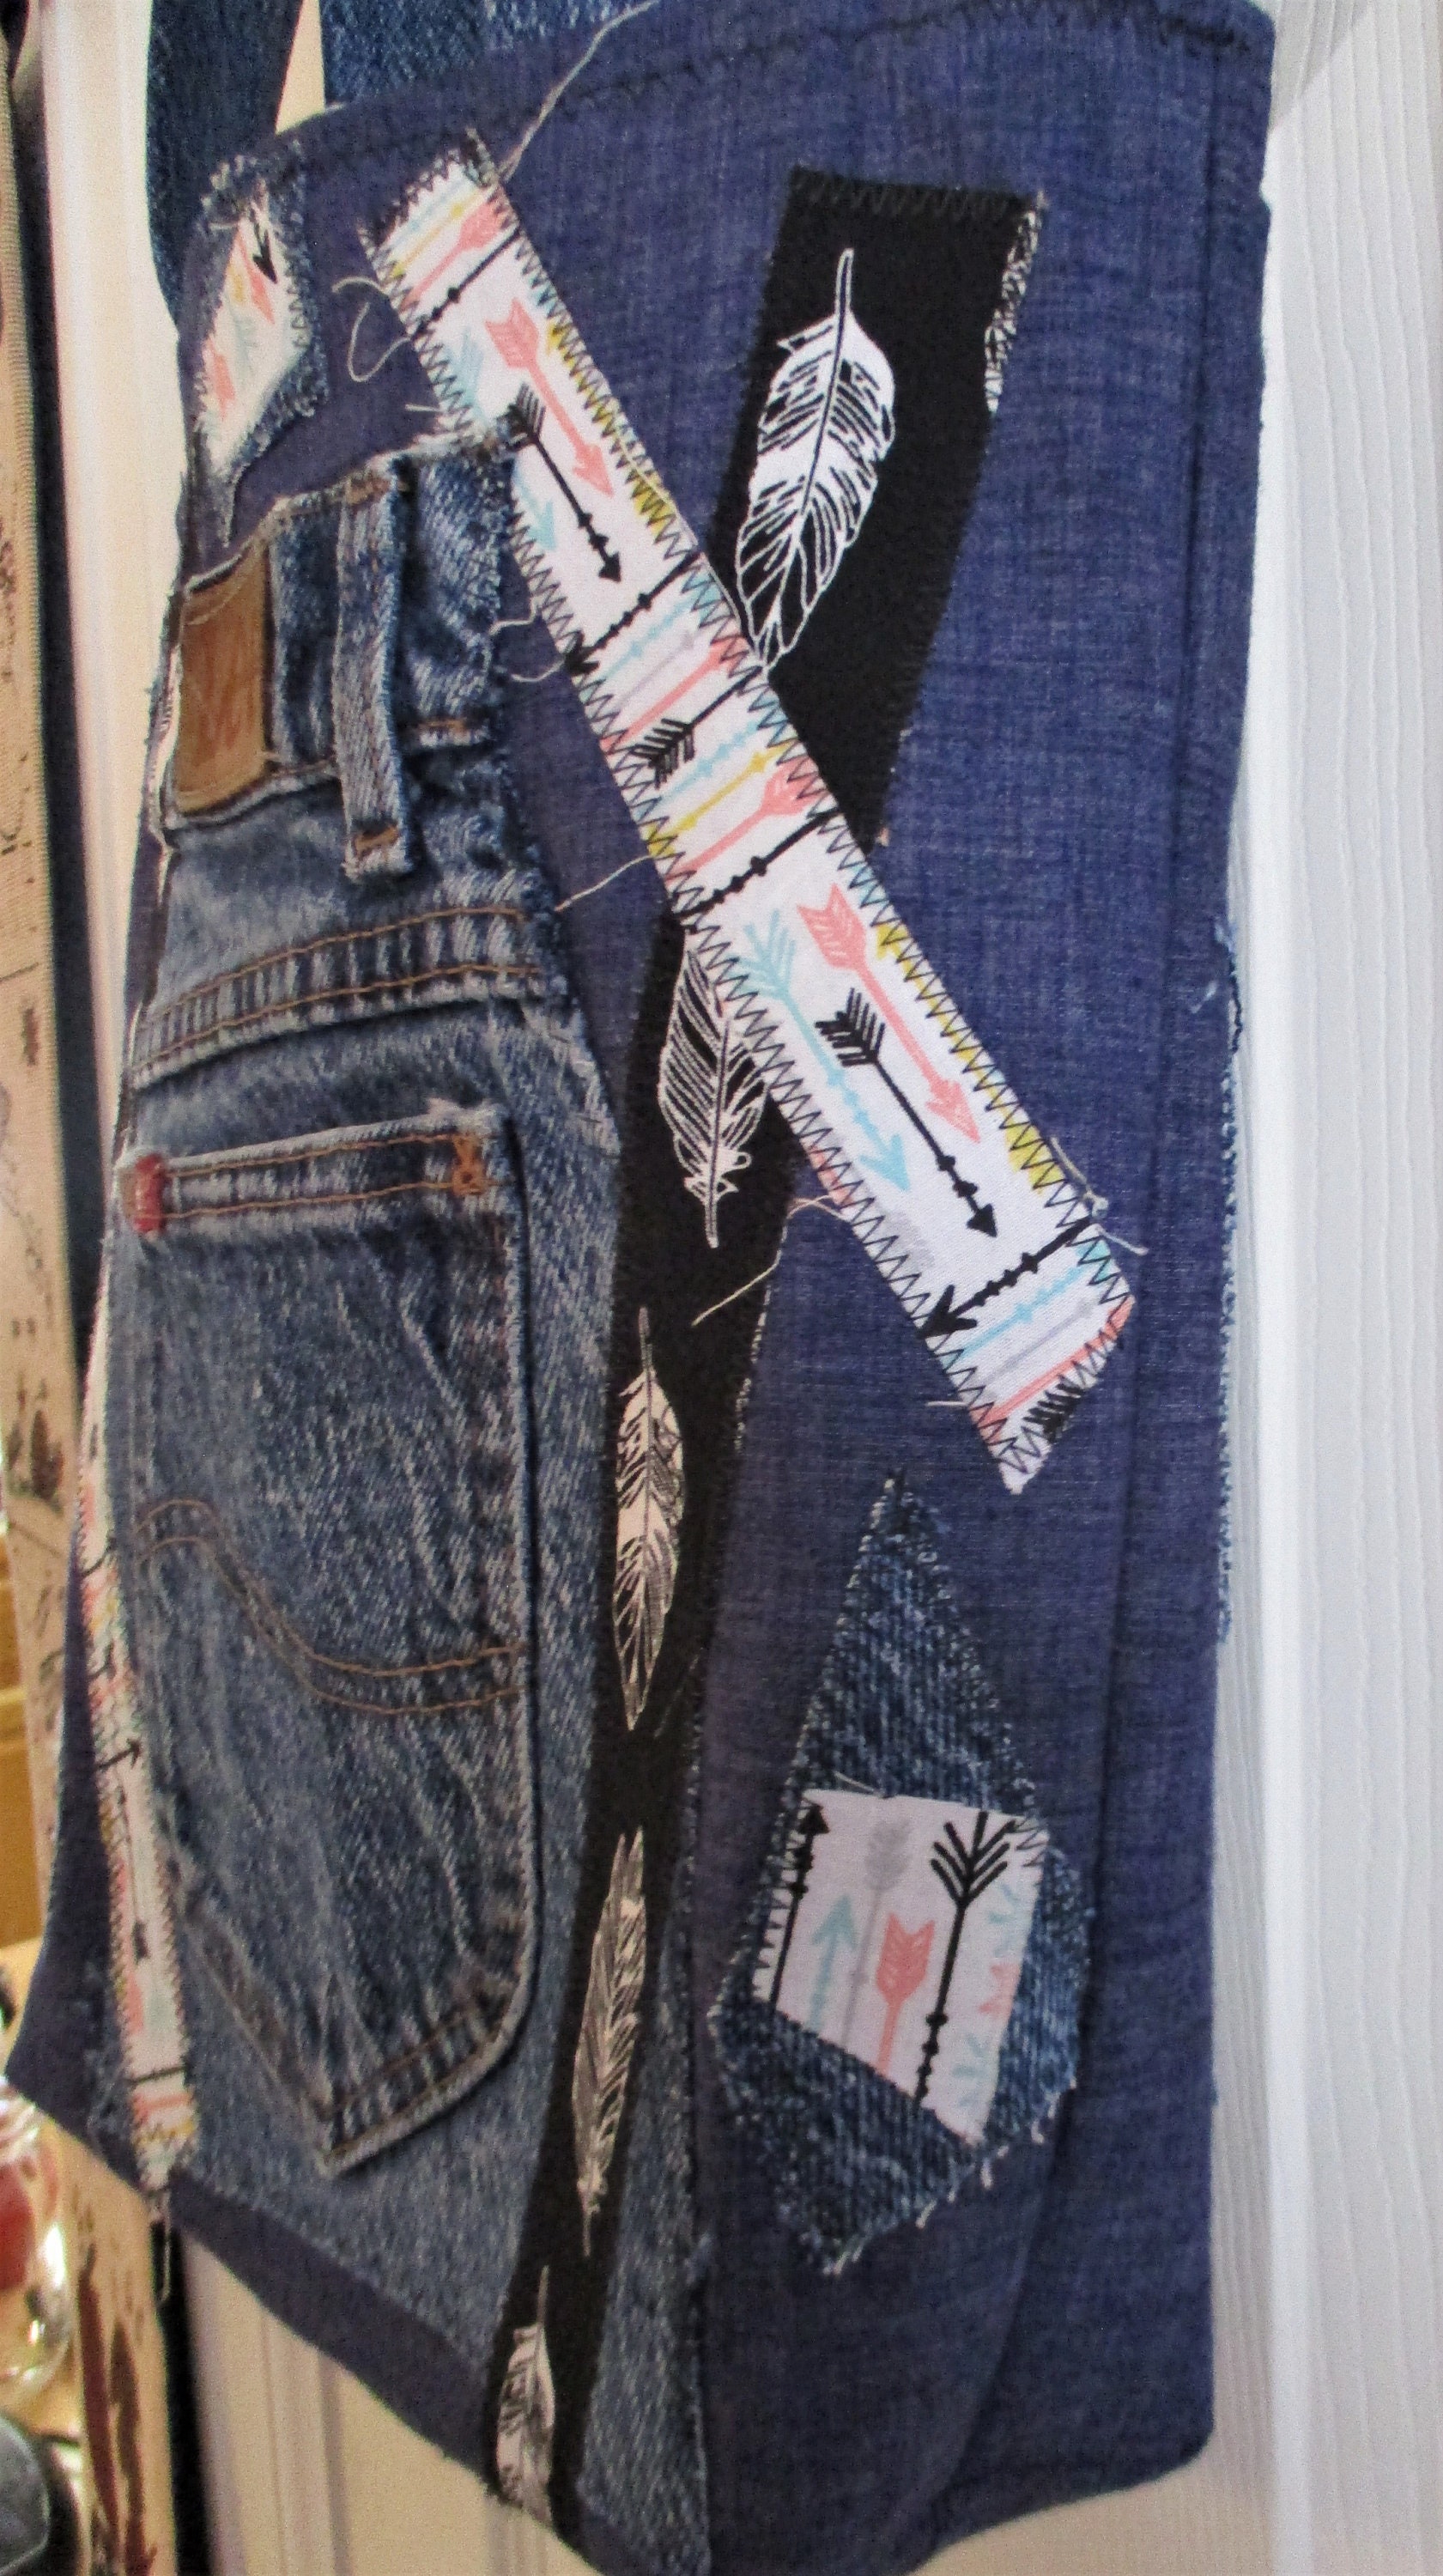 Jean Denim Scrappy Bag Upcycled With Lee Jeans and Other - Etsy